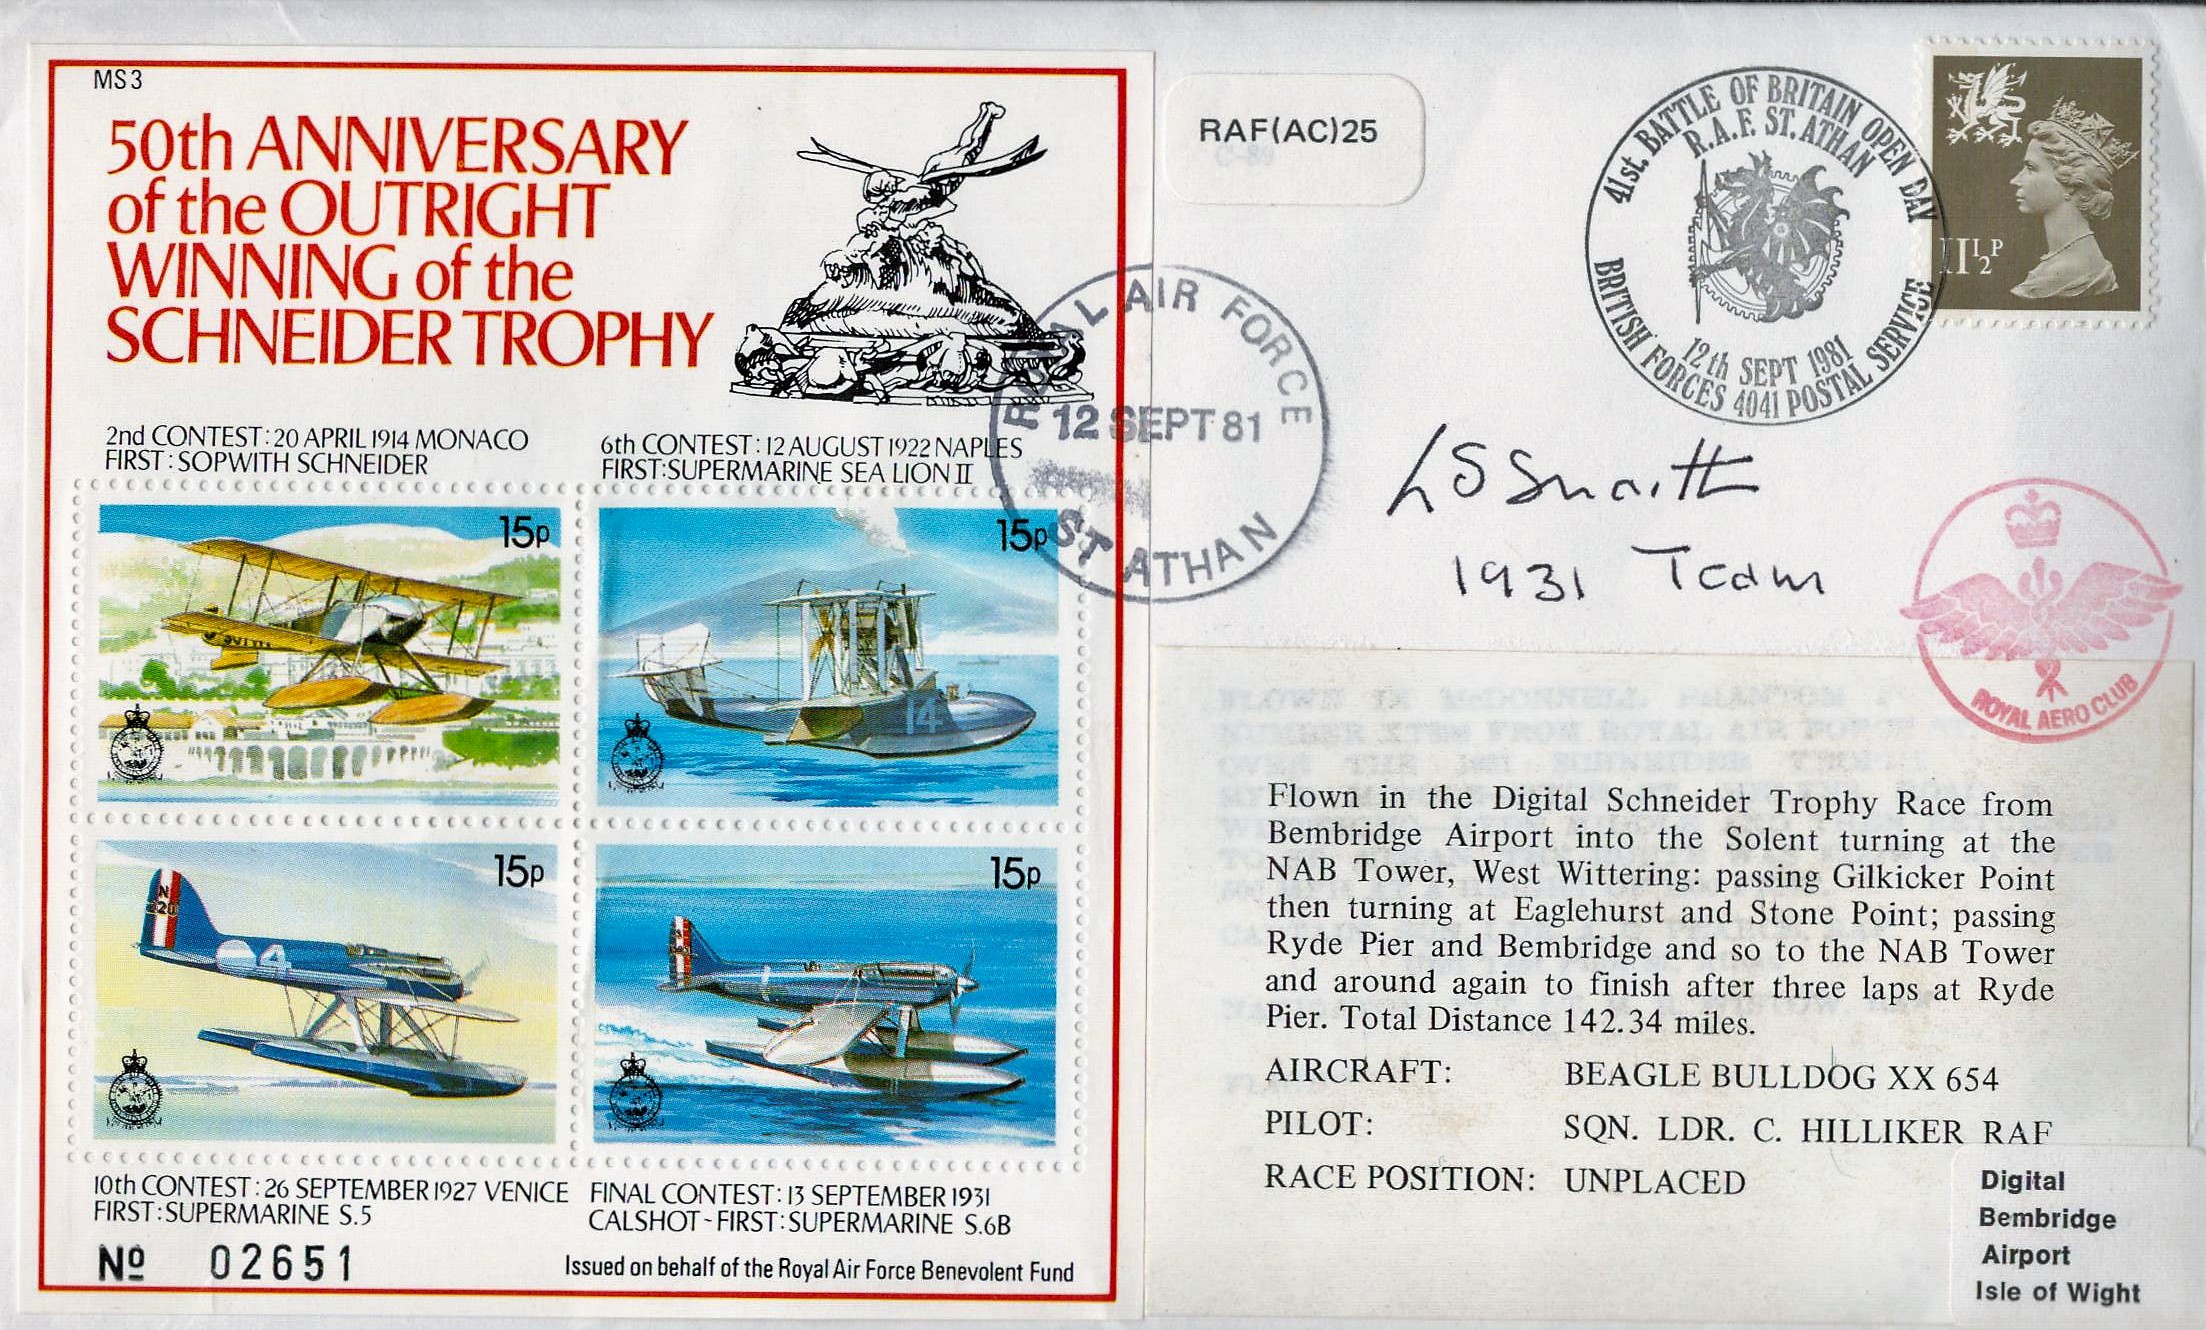 L. S. Snaith 1931 Team and Cliff Hilliker RAF 1985 signed FDC 50th Anniversary of the Outright